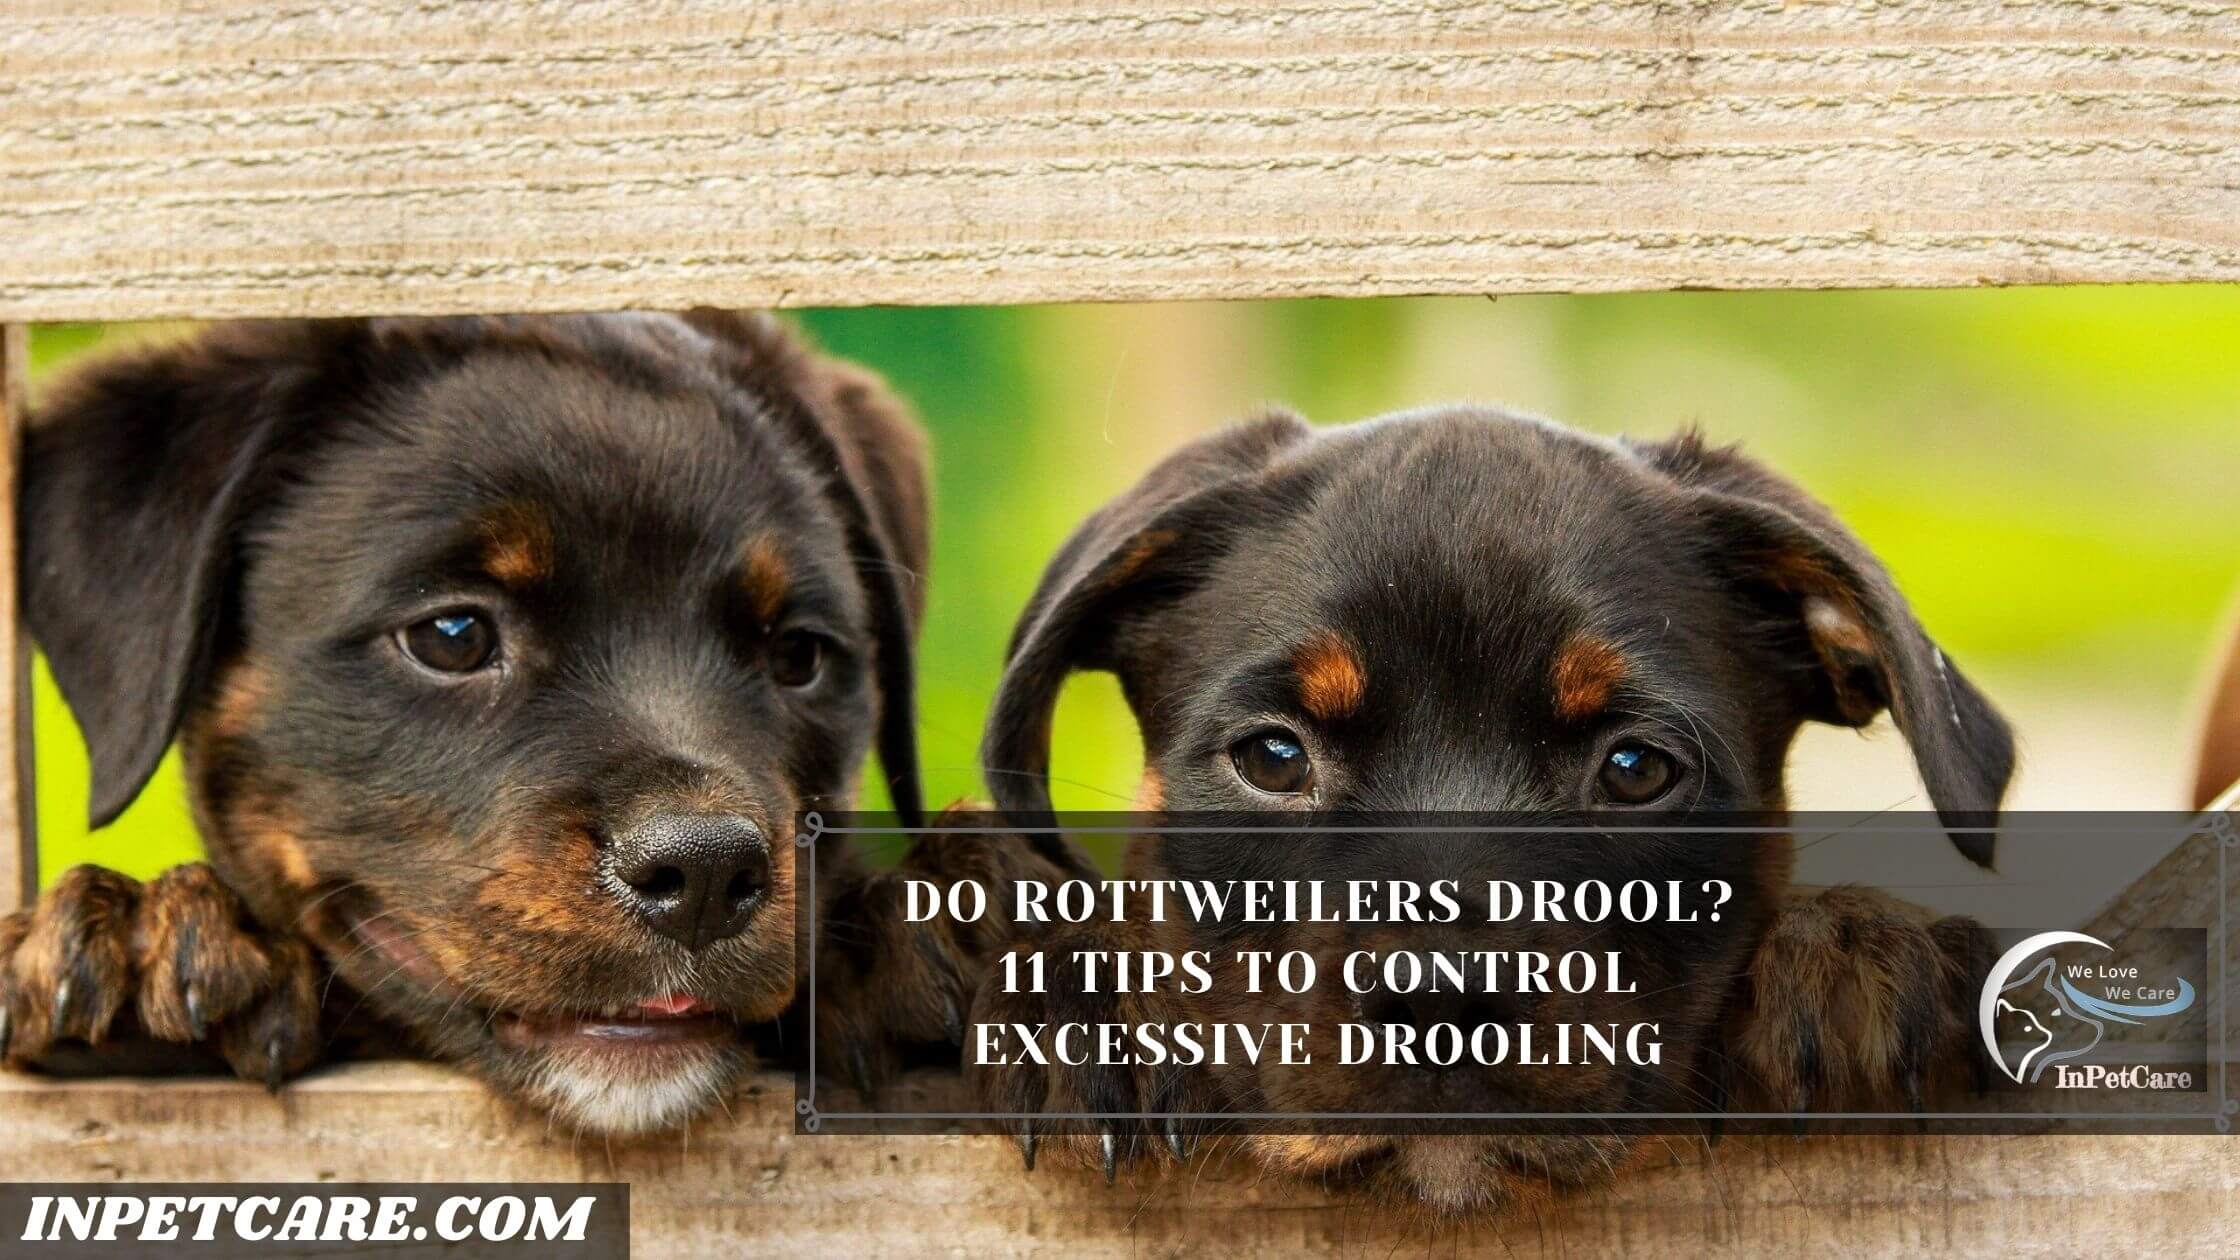 Do Rottweilers Drool? 11 Tips To Control Excessive Drooling